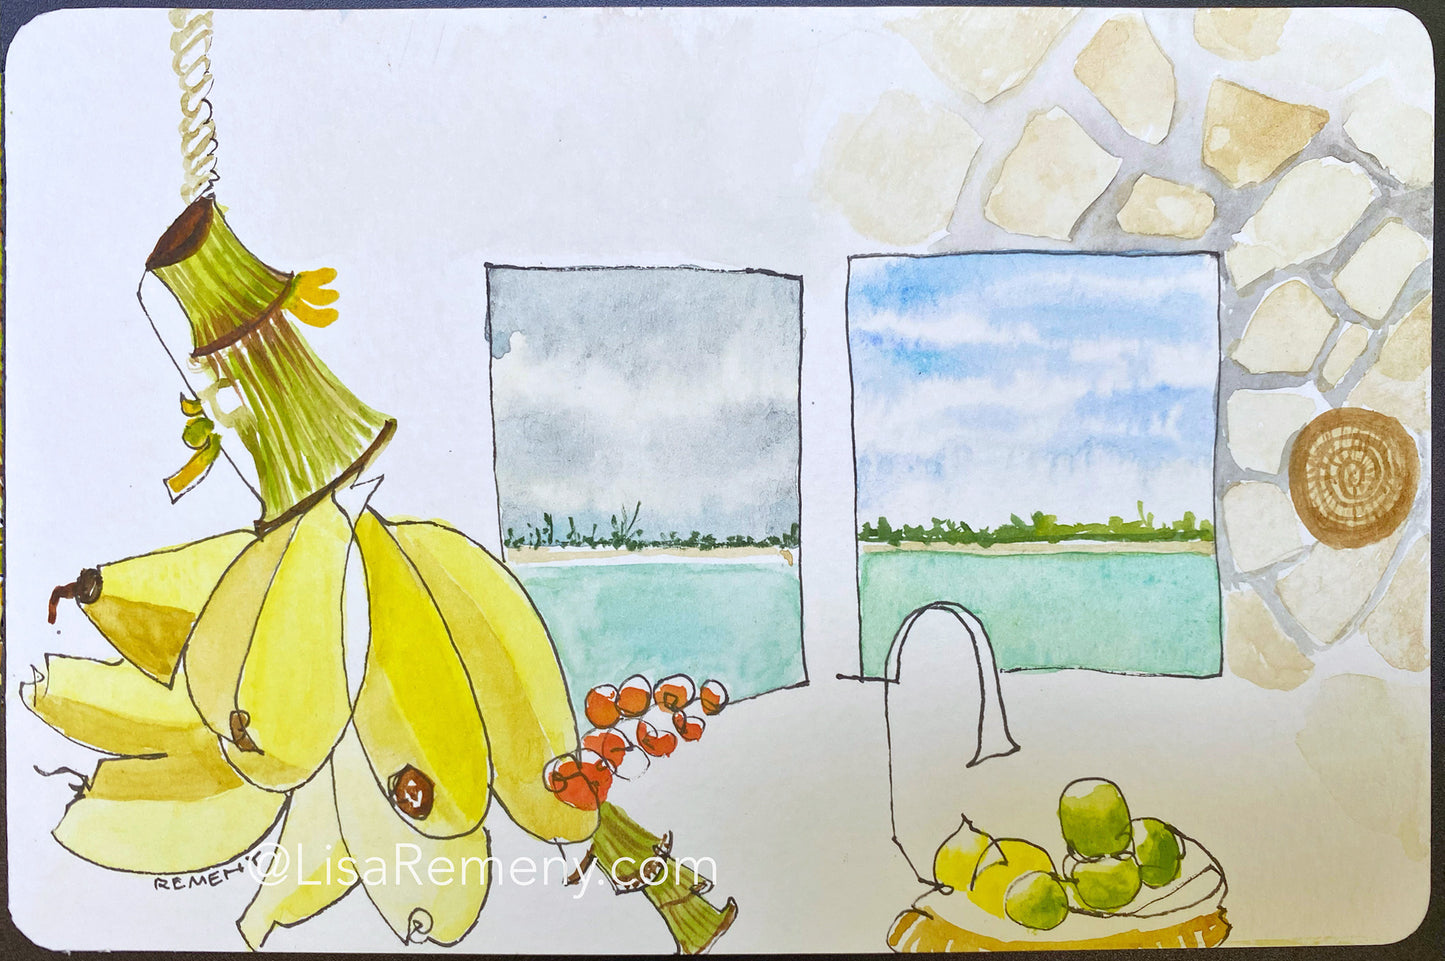 Archive - Watercolor + Ink on Paper - Cat Island Bananas x 2